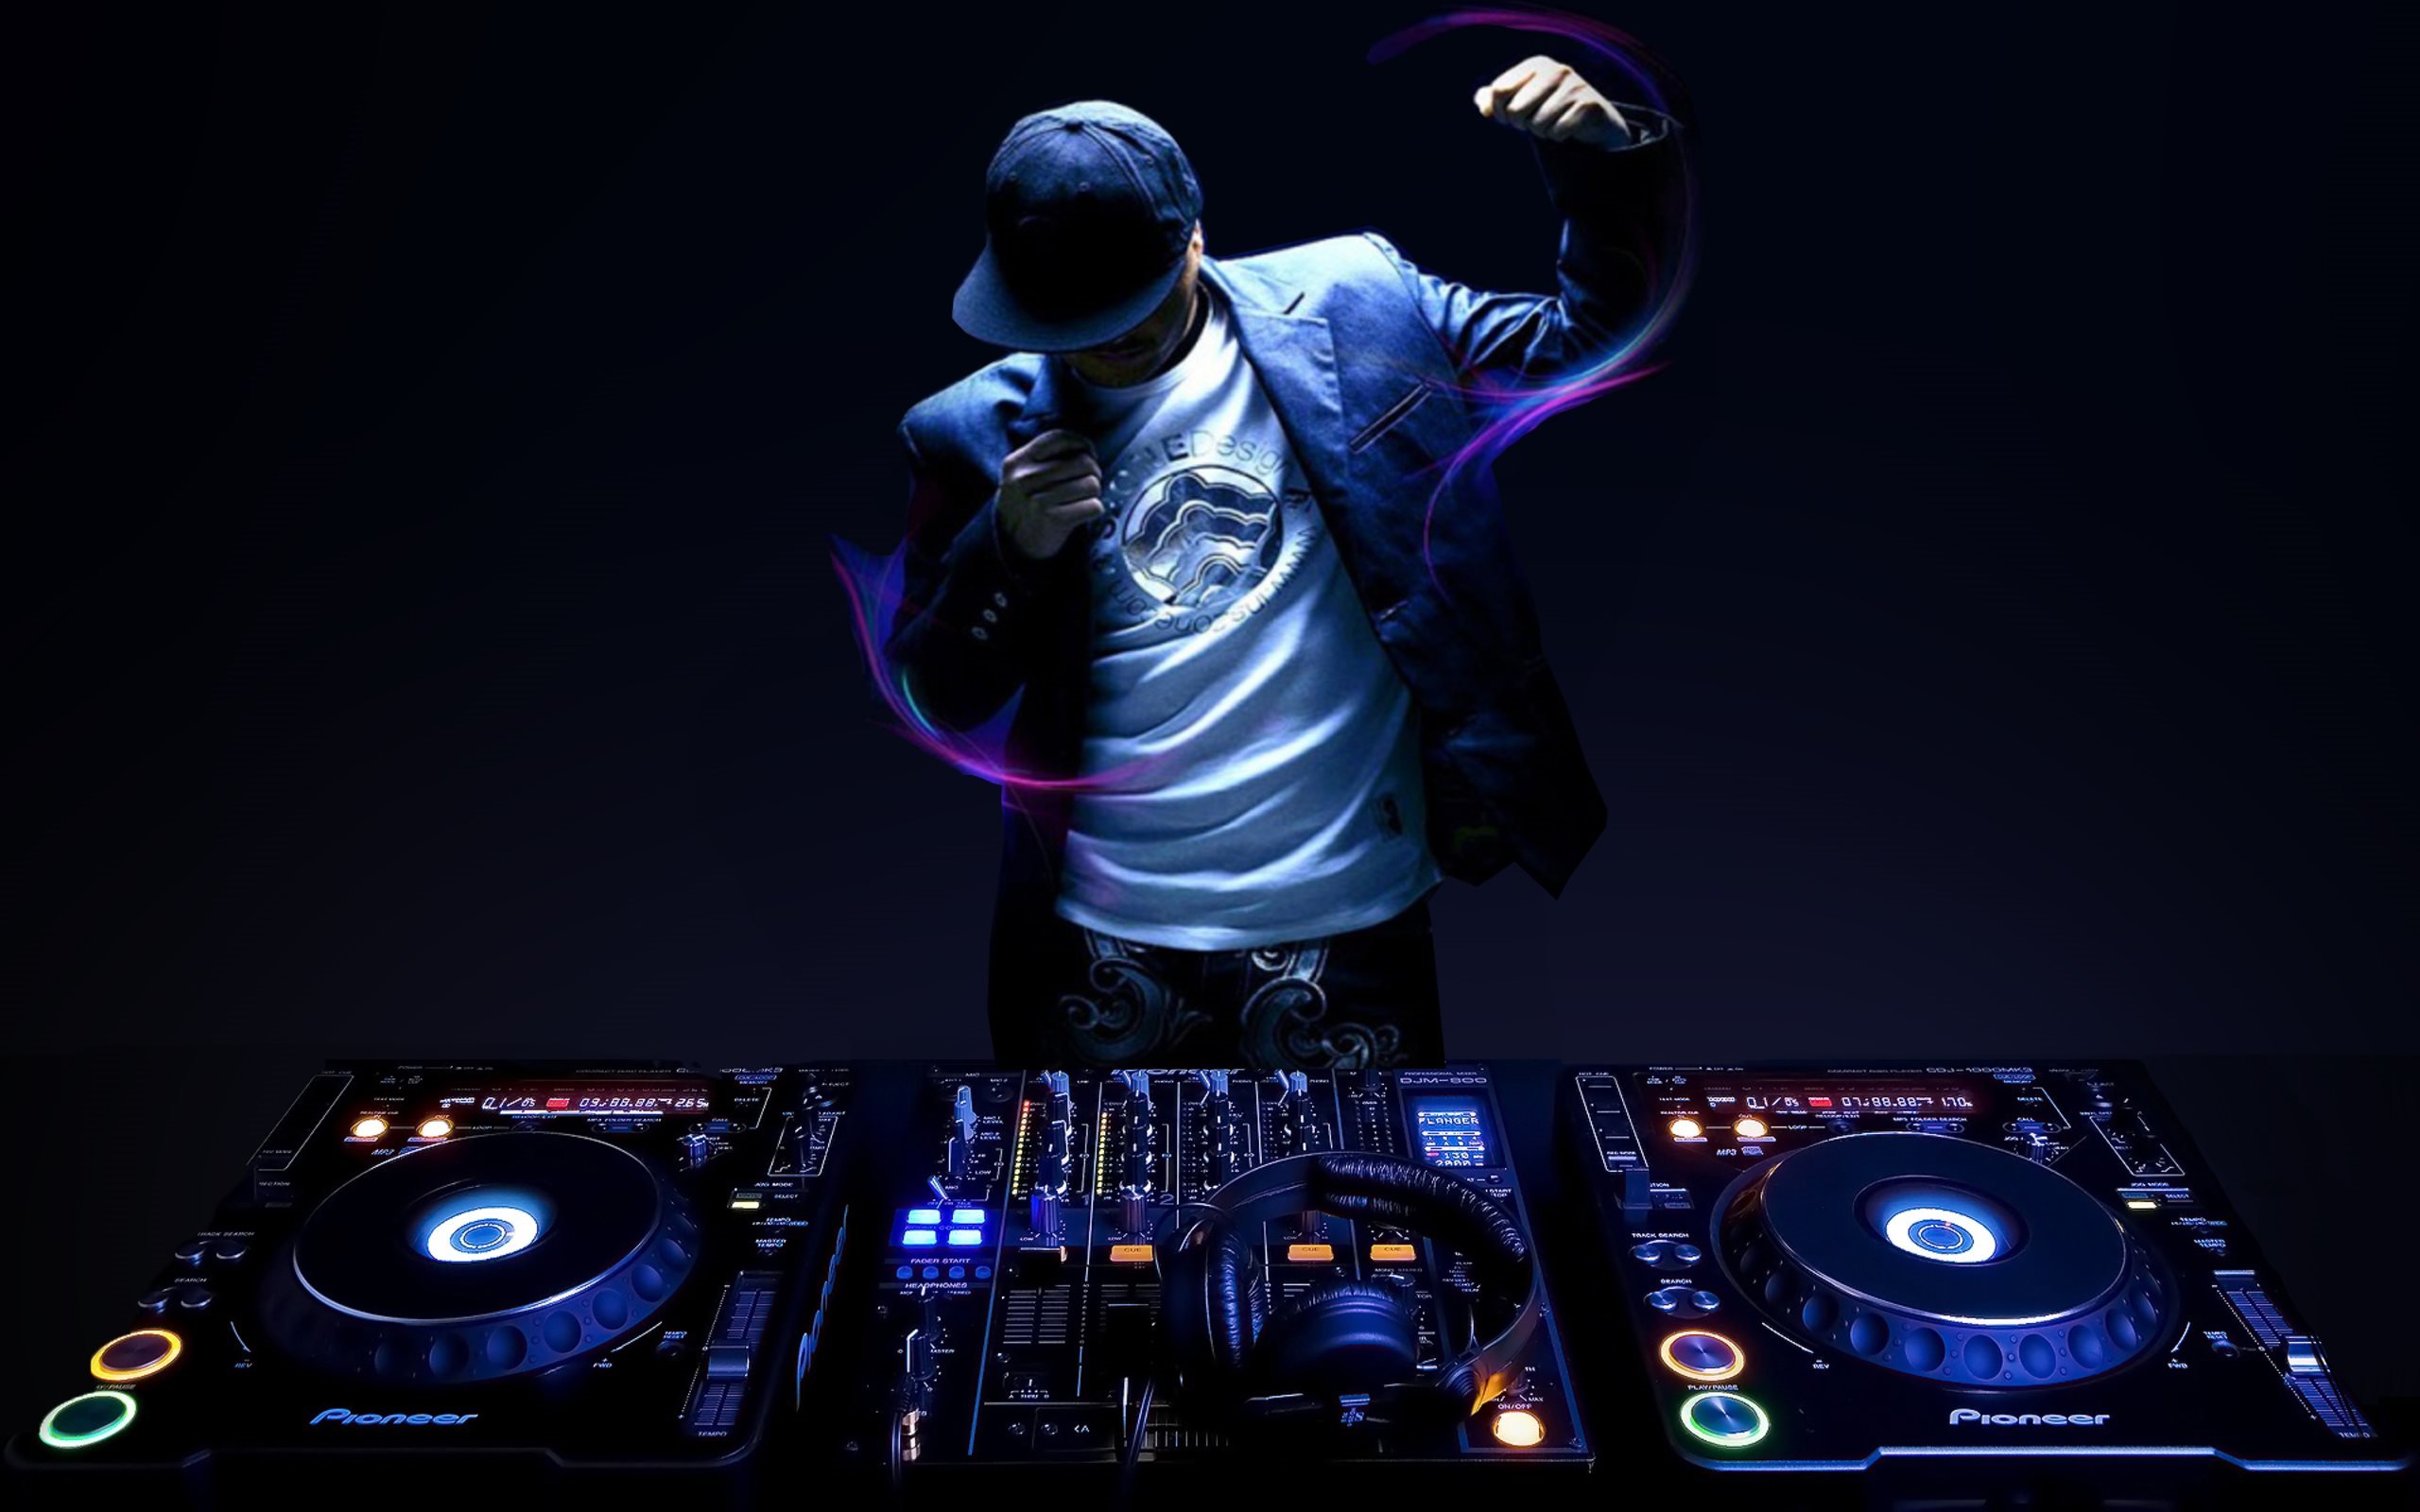 Download wallpaper DJ, night club, dj console, concert, musician, DJs for desktop with resolution 2560x1600. High Quality HD picture wallpaper